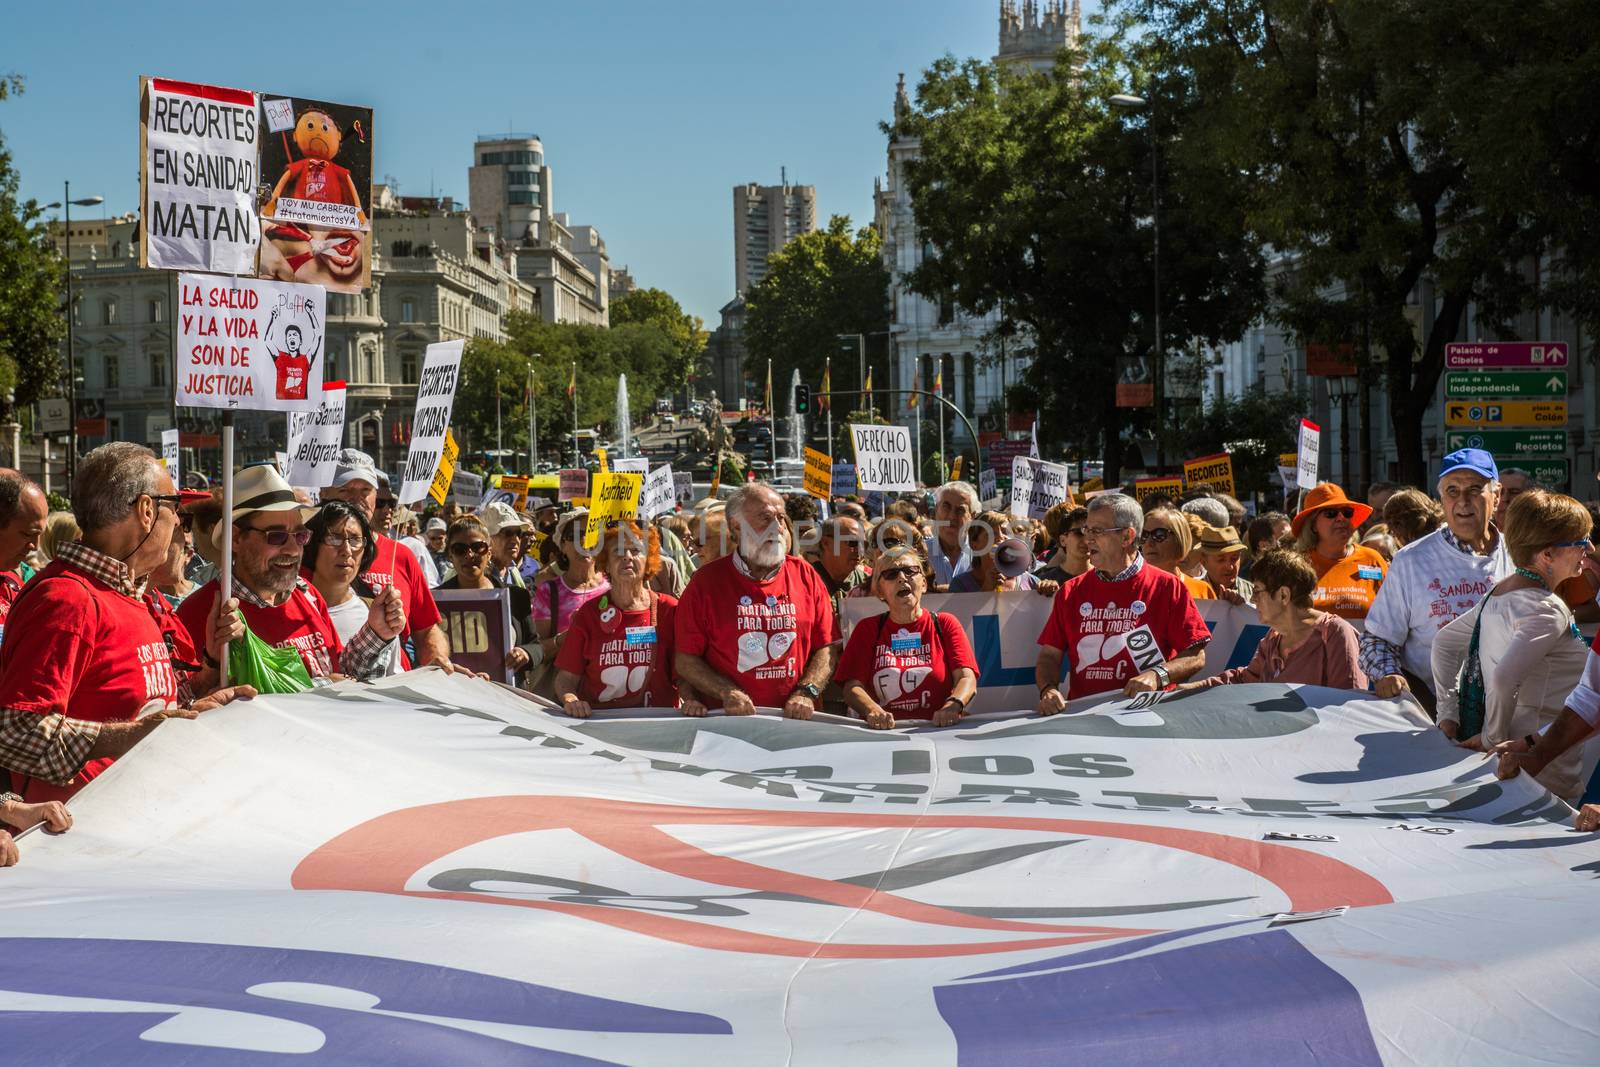 SPAIN, Madrid: Hundreds take to the streets of Madrid, Spain on September 20, 2015 as part of the White Tide movement to rally against health care privatization and budget cuts. 